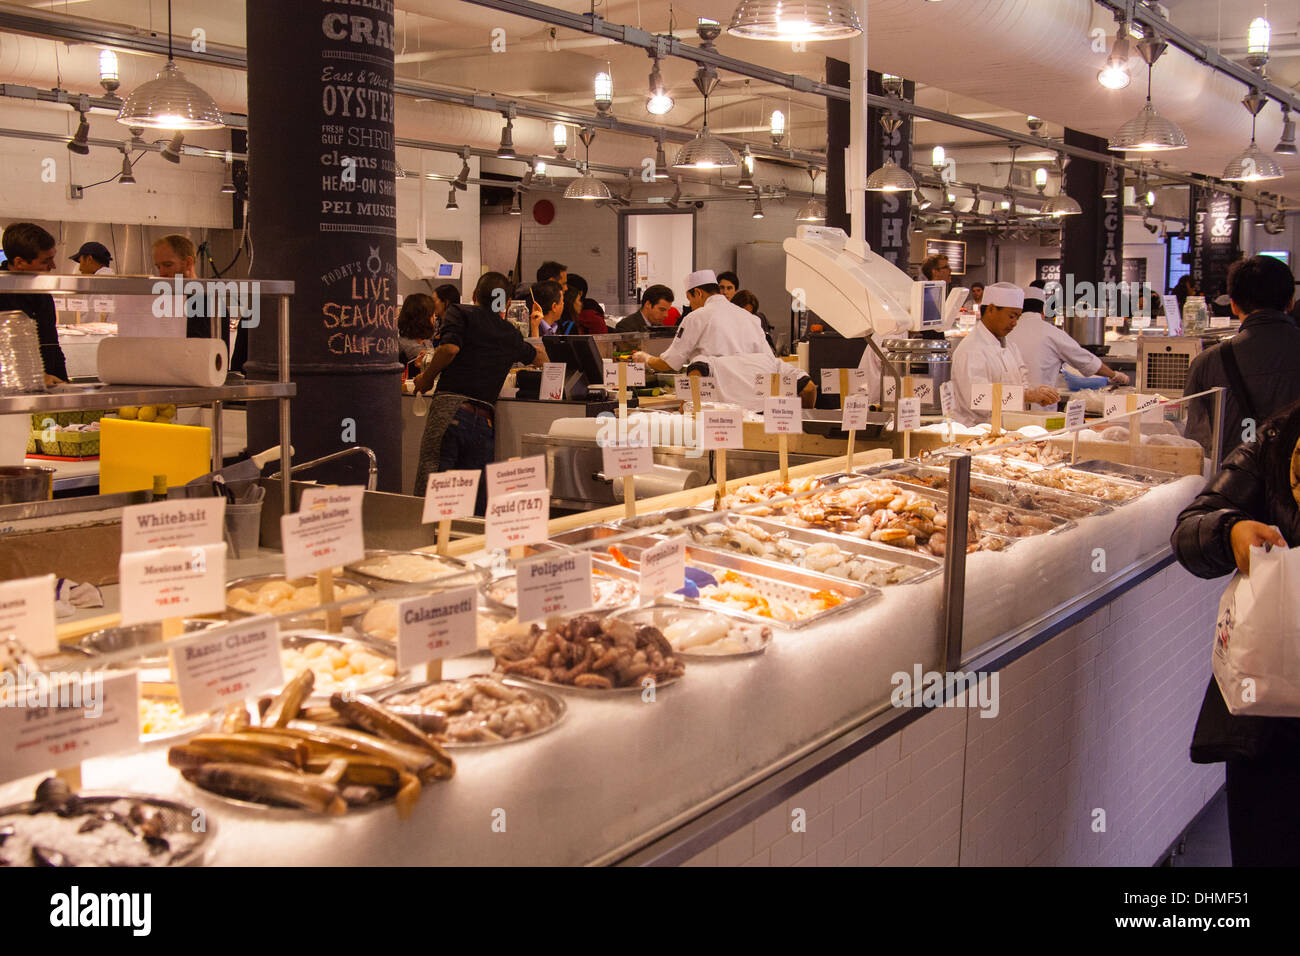 The Lobster Place seafood Market or fishmongers, Chelsea Food Market, New York City, United States of America. Stock Photo